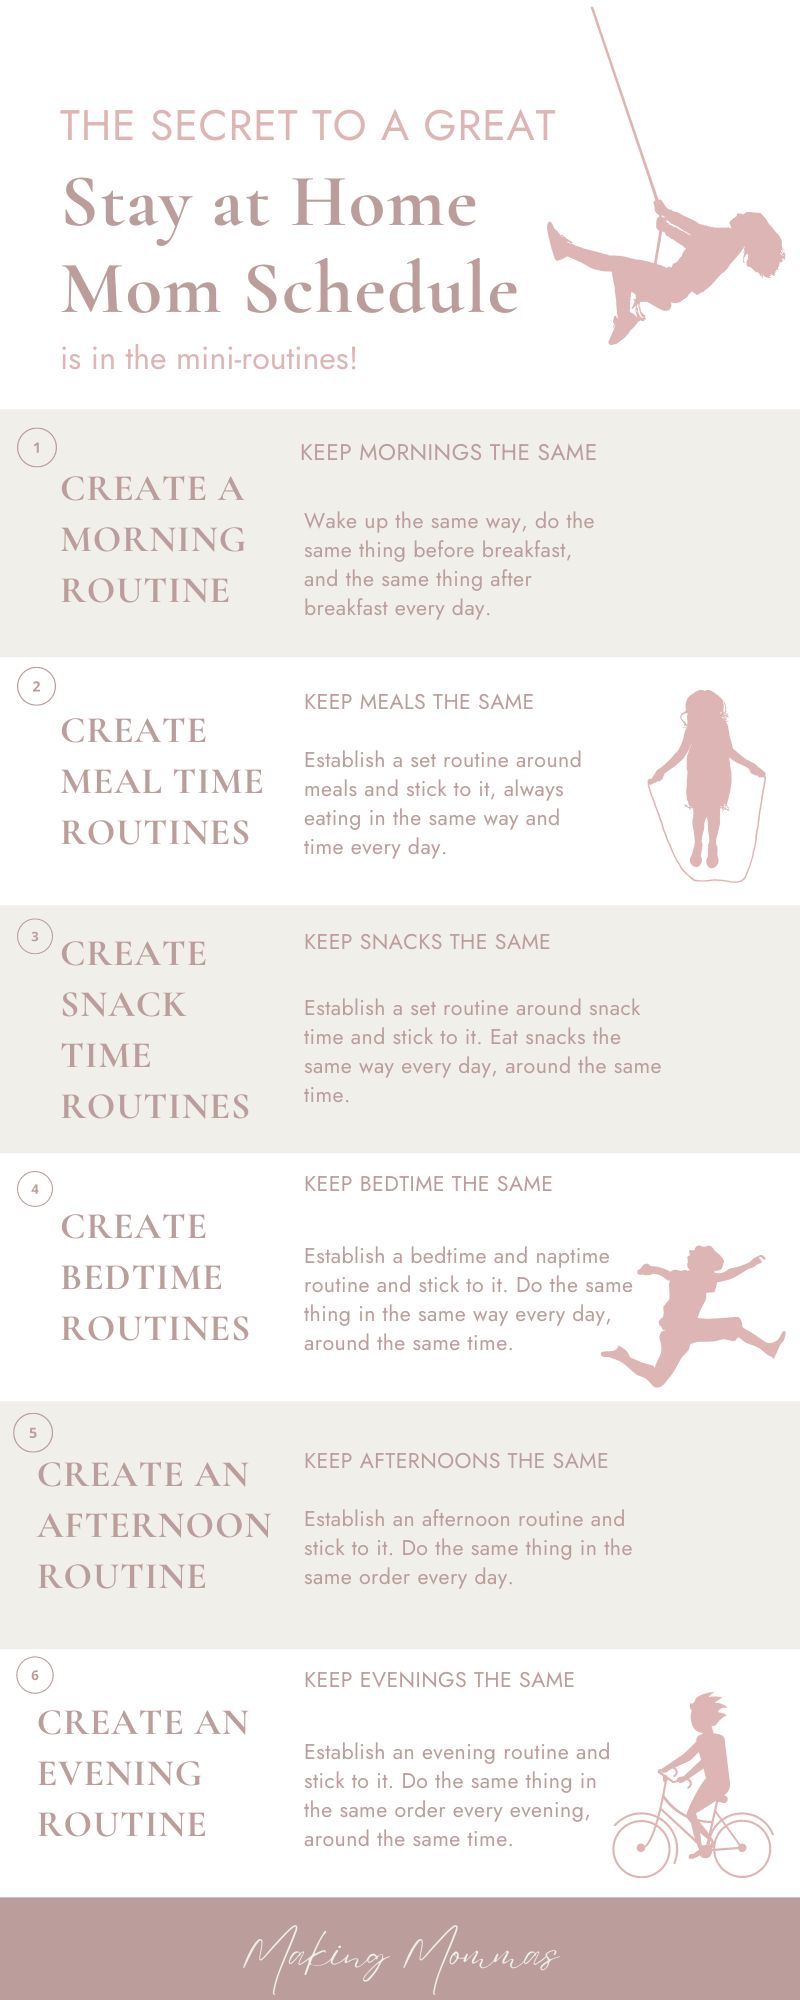 An image of an infographic that explains the steps to the secret of a great stay at home mom schedule.